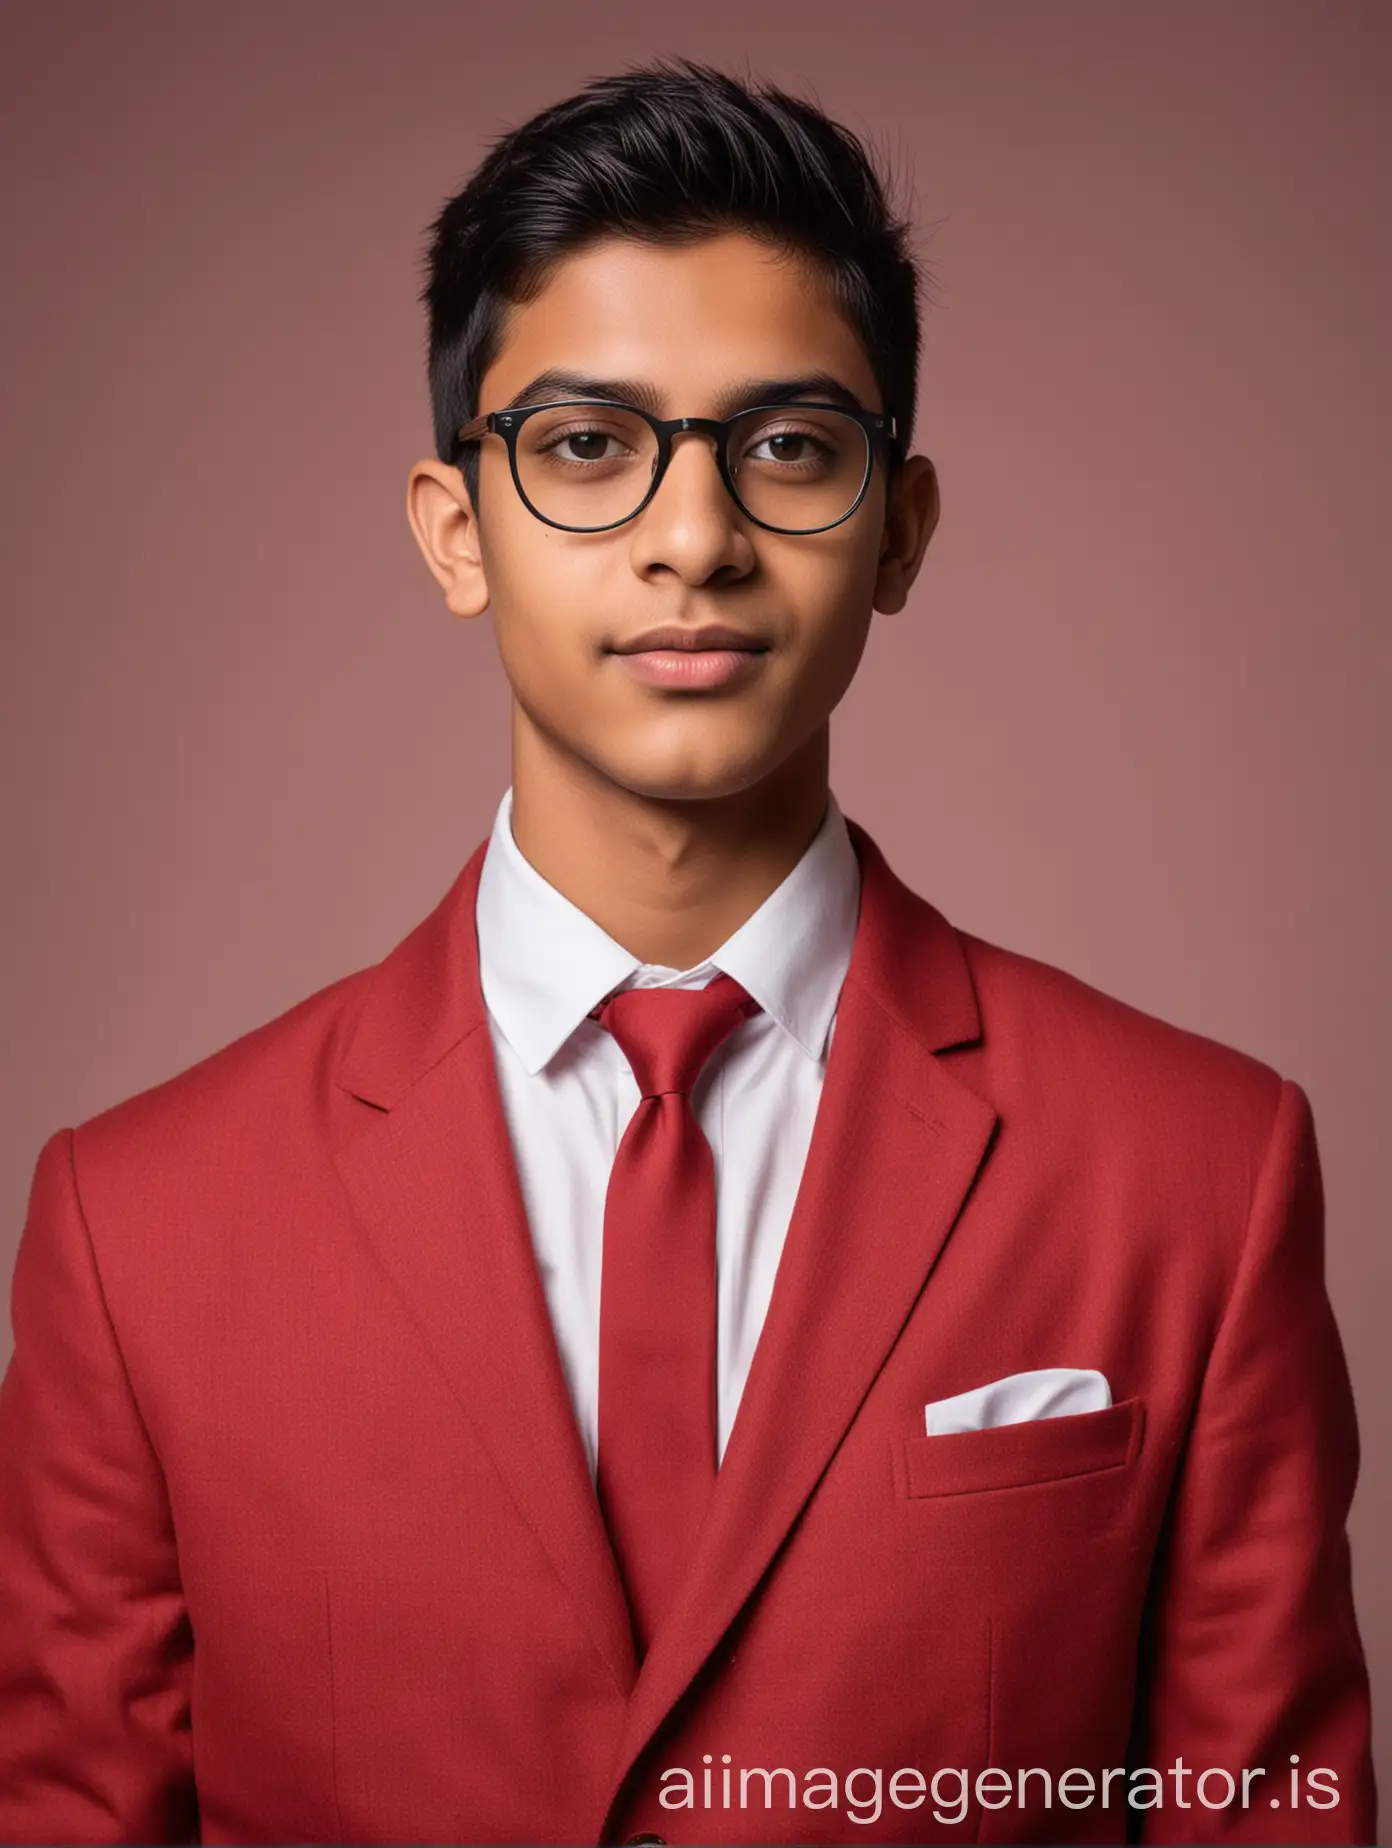 Young-Indian-Man-in-Formal-Red-Blazer-and-Glasses-Poses-for-LinkedIn-Picture